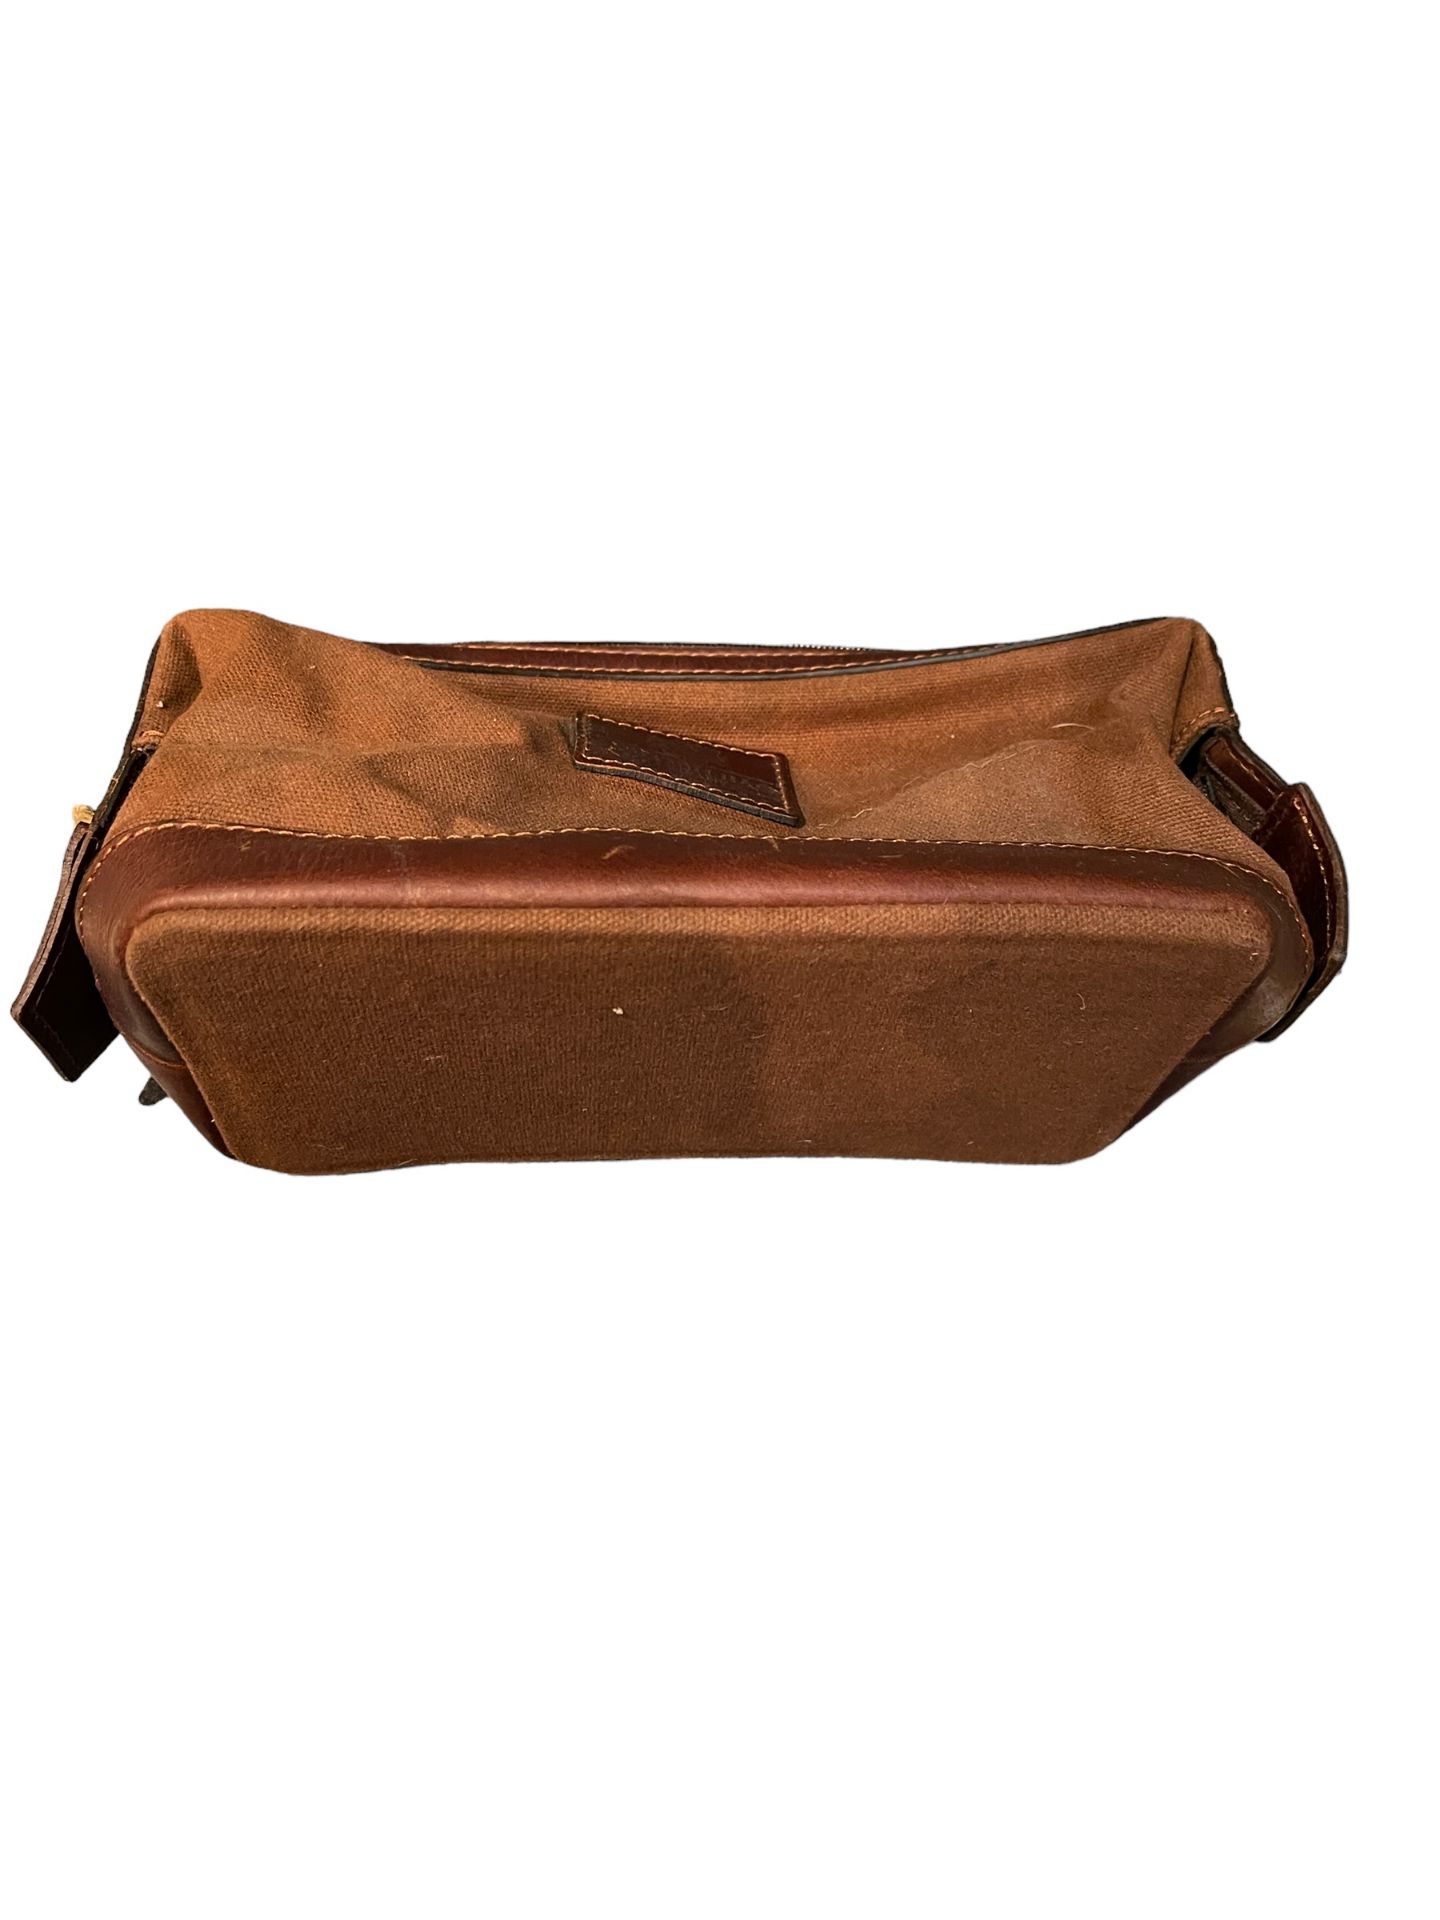 British wash men's toilet bag new x stock from a private jet charter. - Image 4 of 8